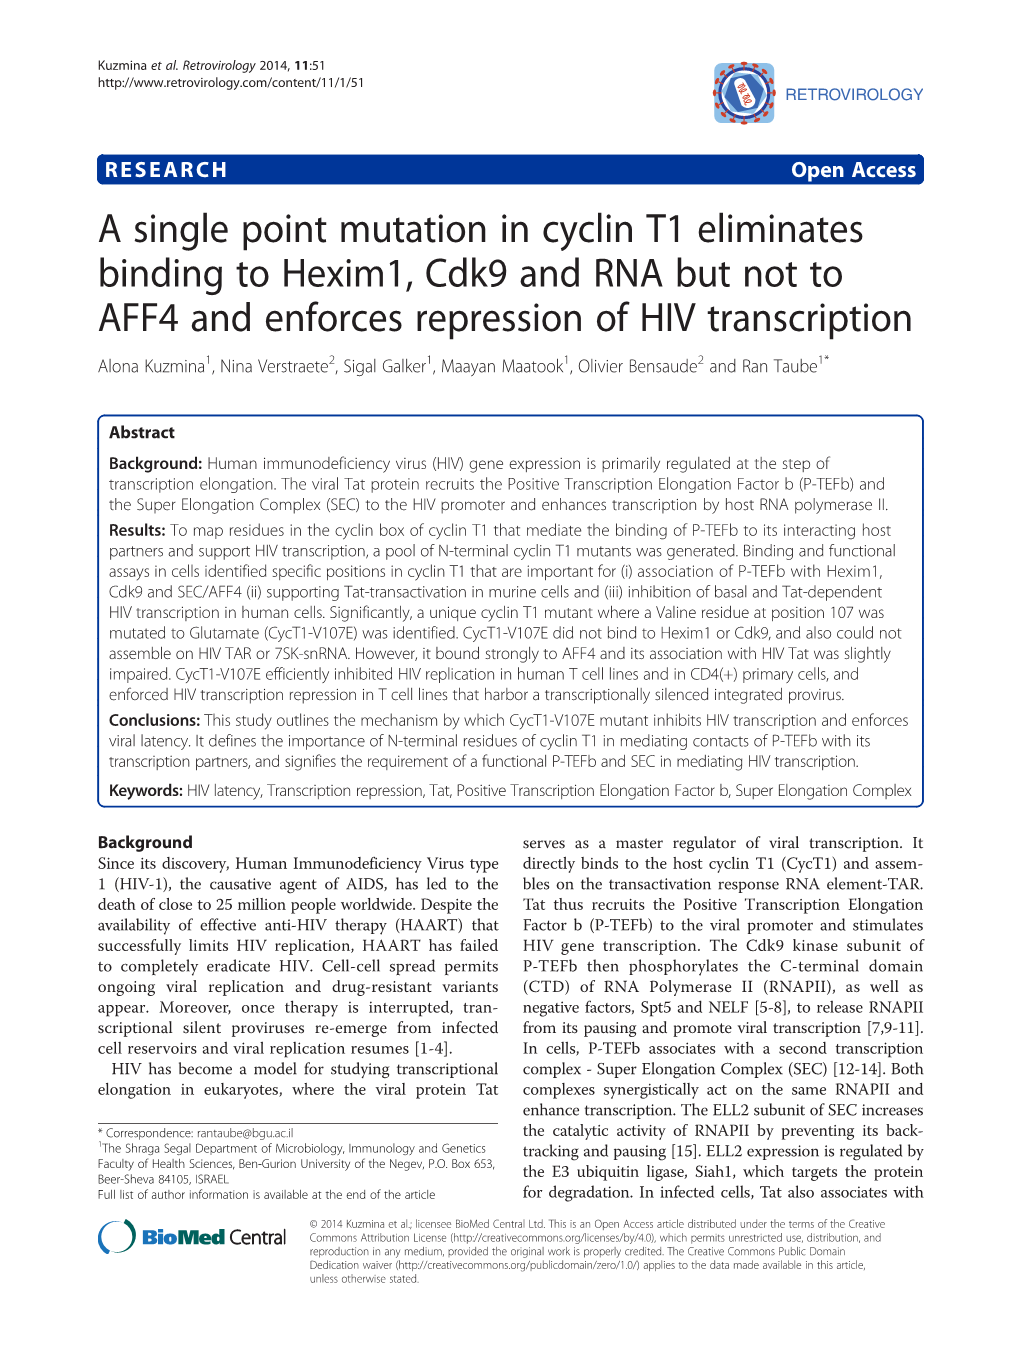 A Single Point Mutation in Cyclin T1 Eliminates Binding to Hexim1, Cdk9